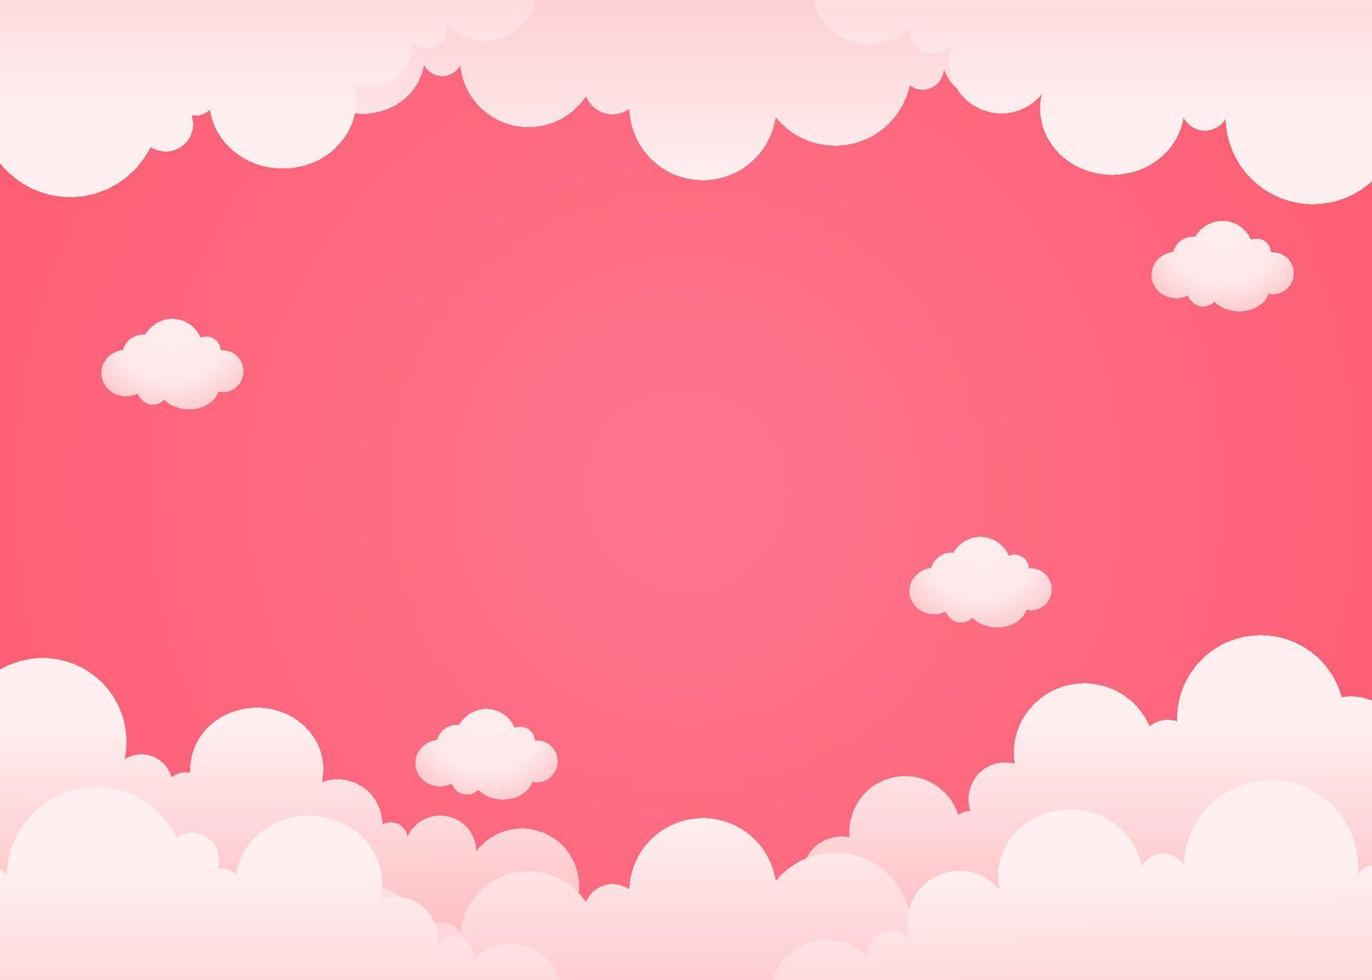 pink background with clouds illustration for valentines day celebration ...